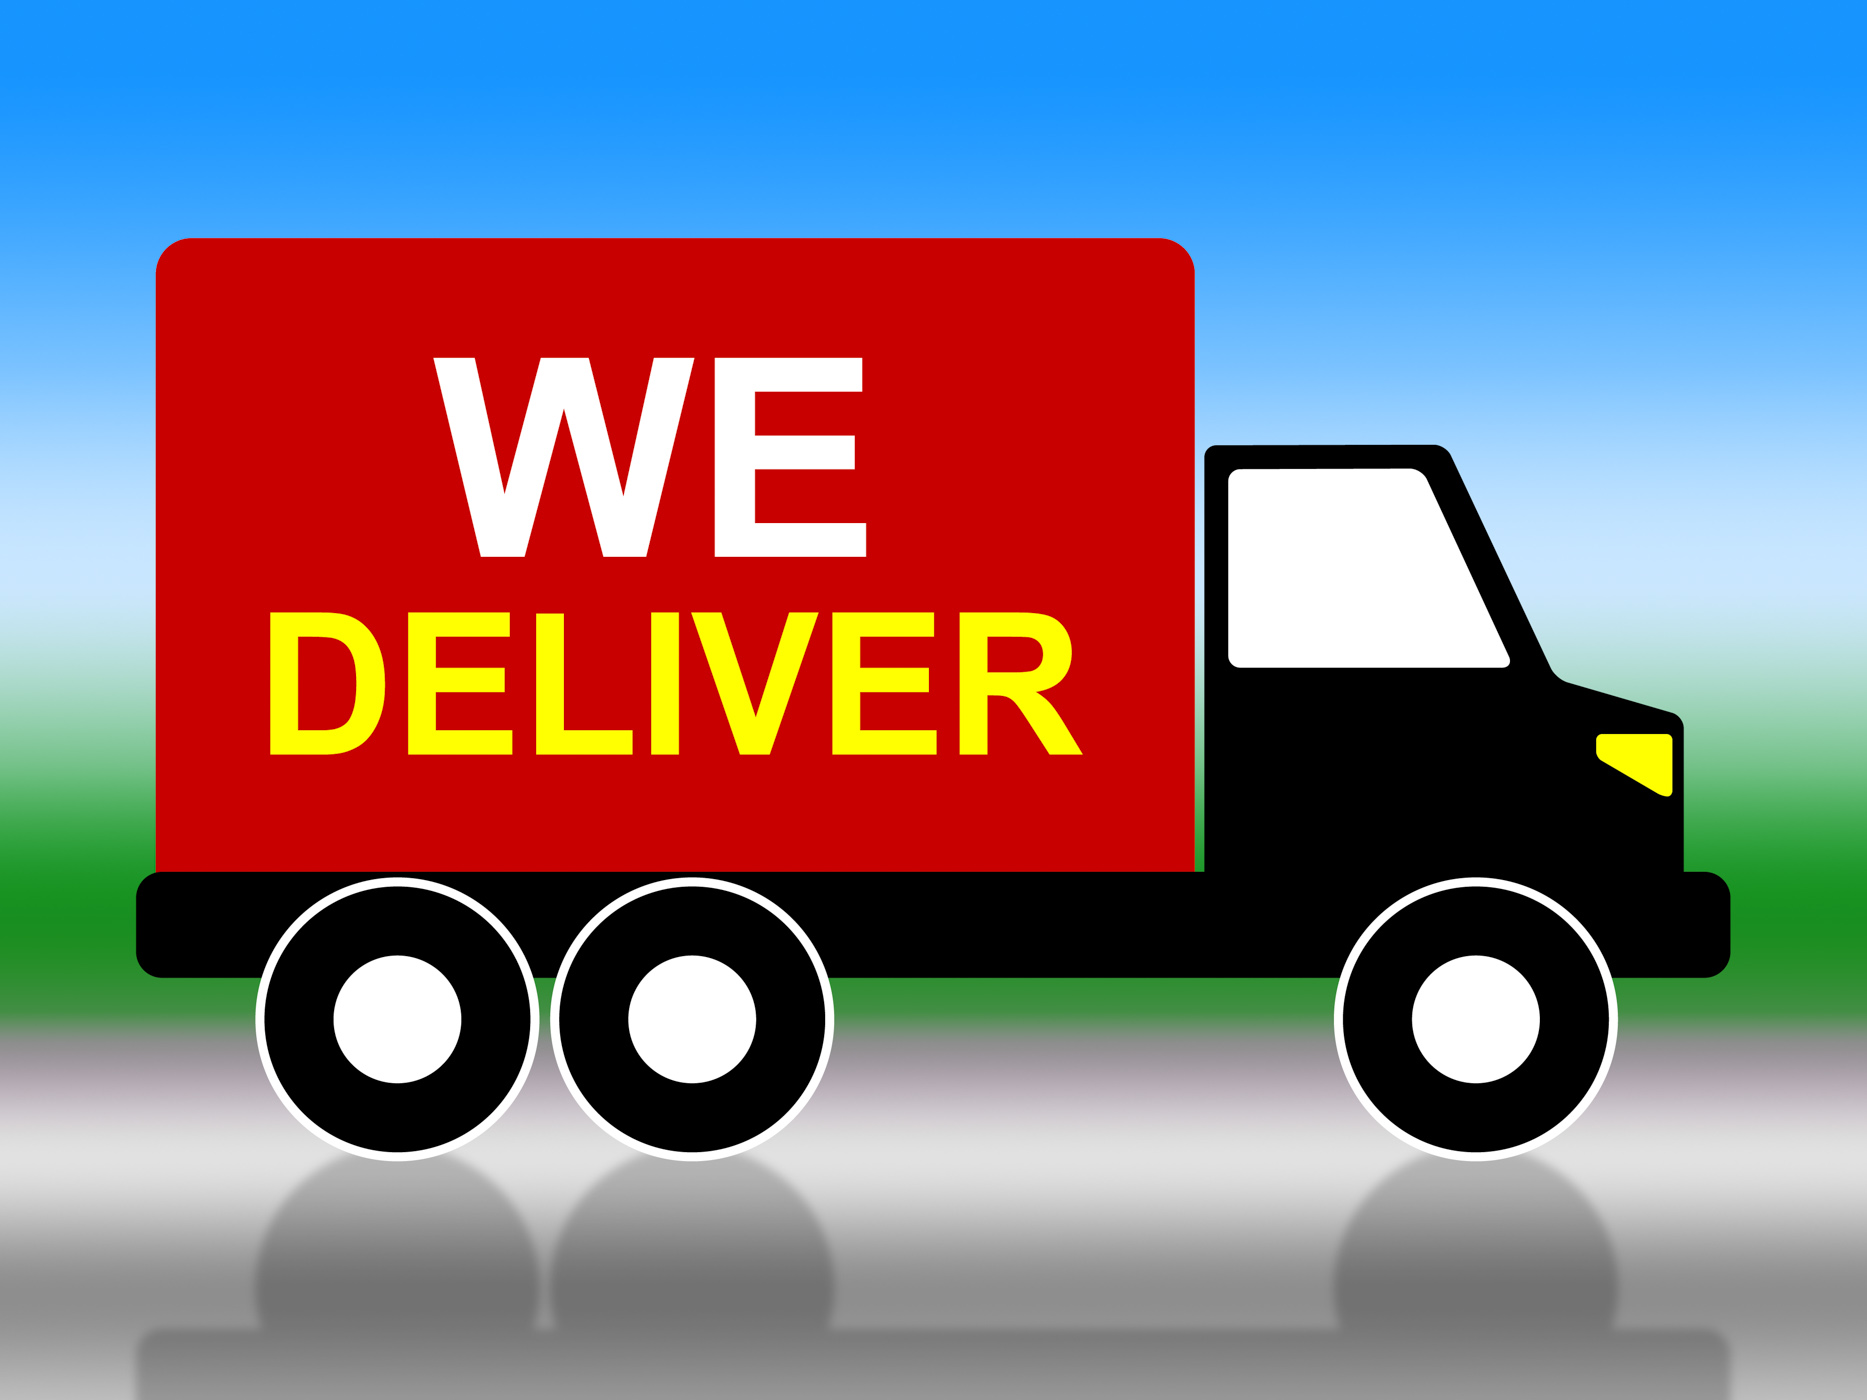 We deliver represents transporting parcel and moving photo